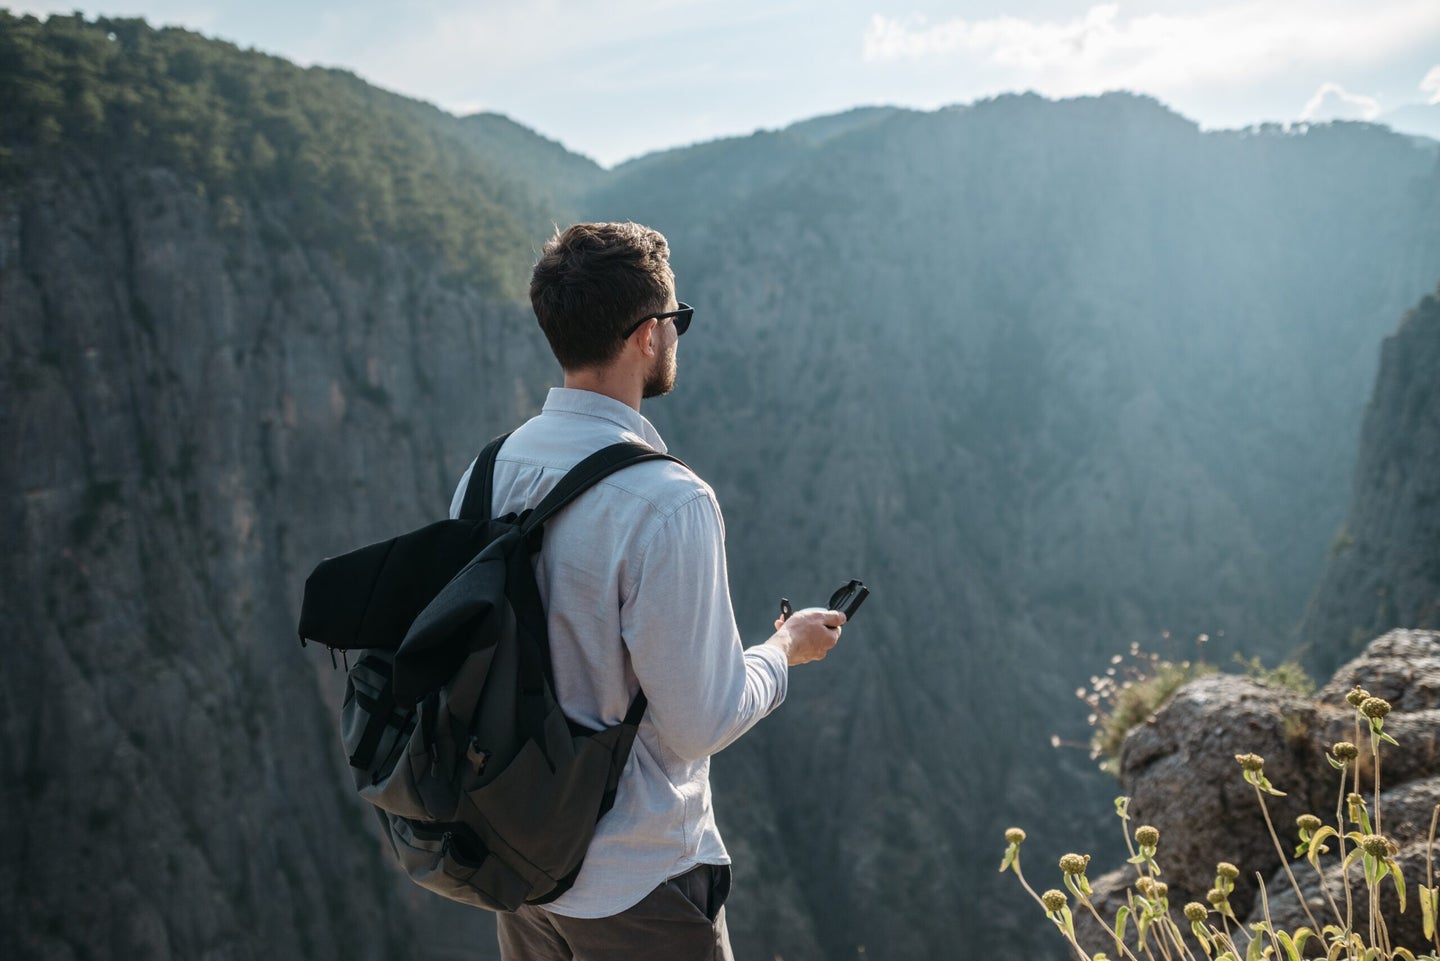 Man looking at phone on mountain top